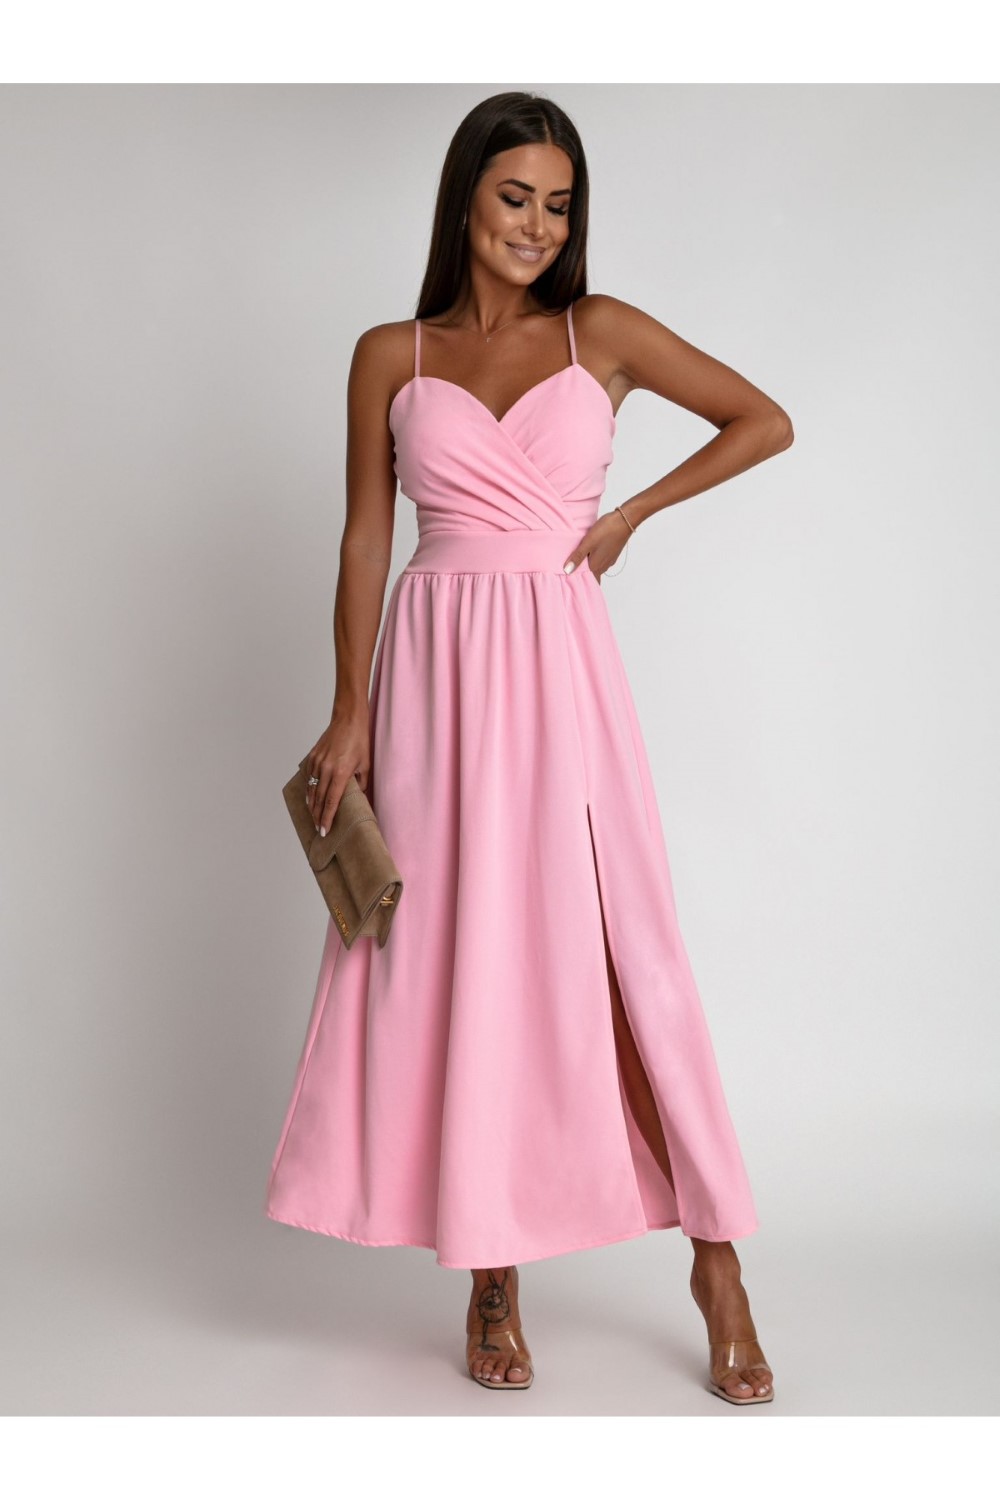 Maxi dress with straps, pink